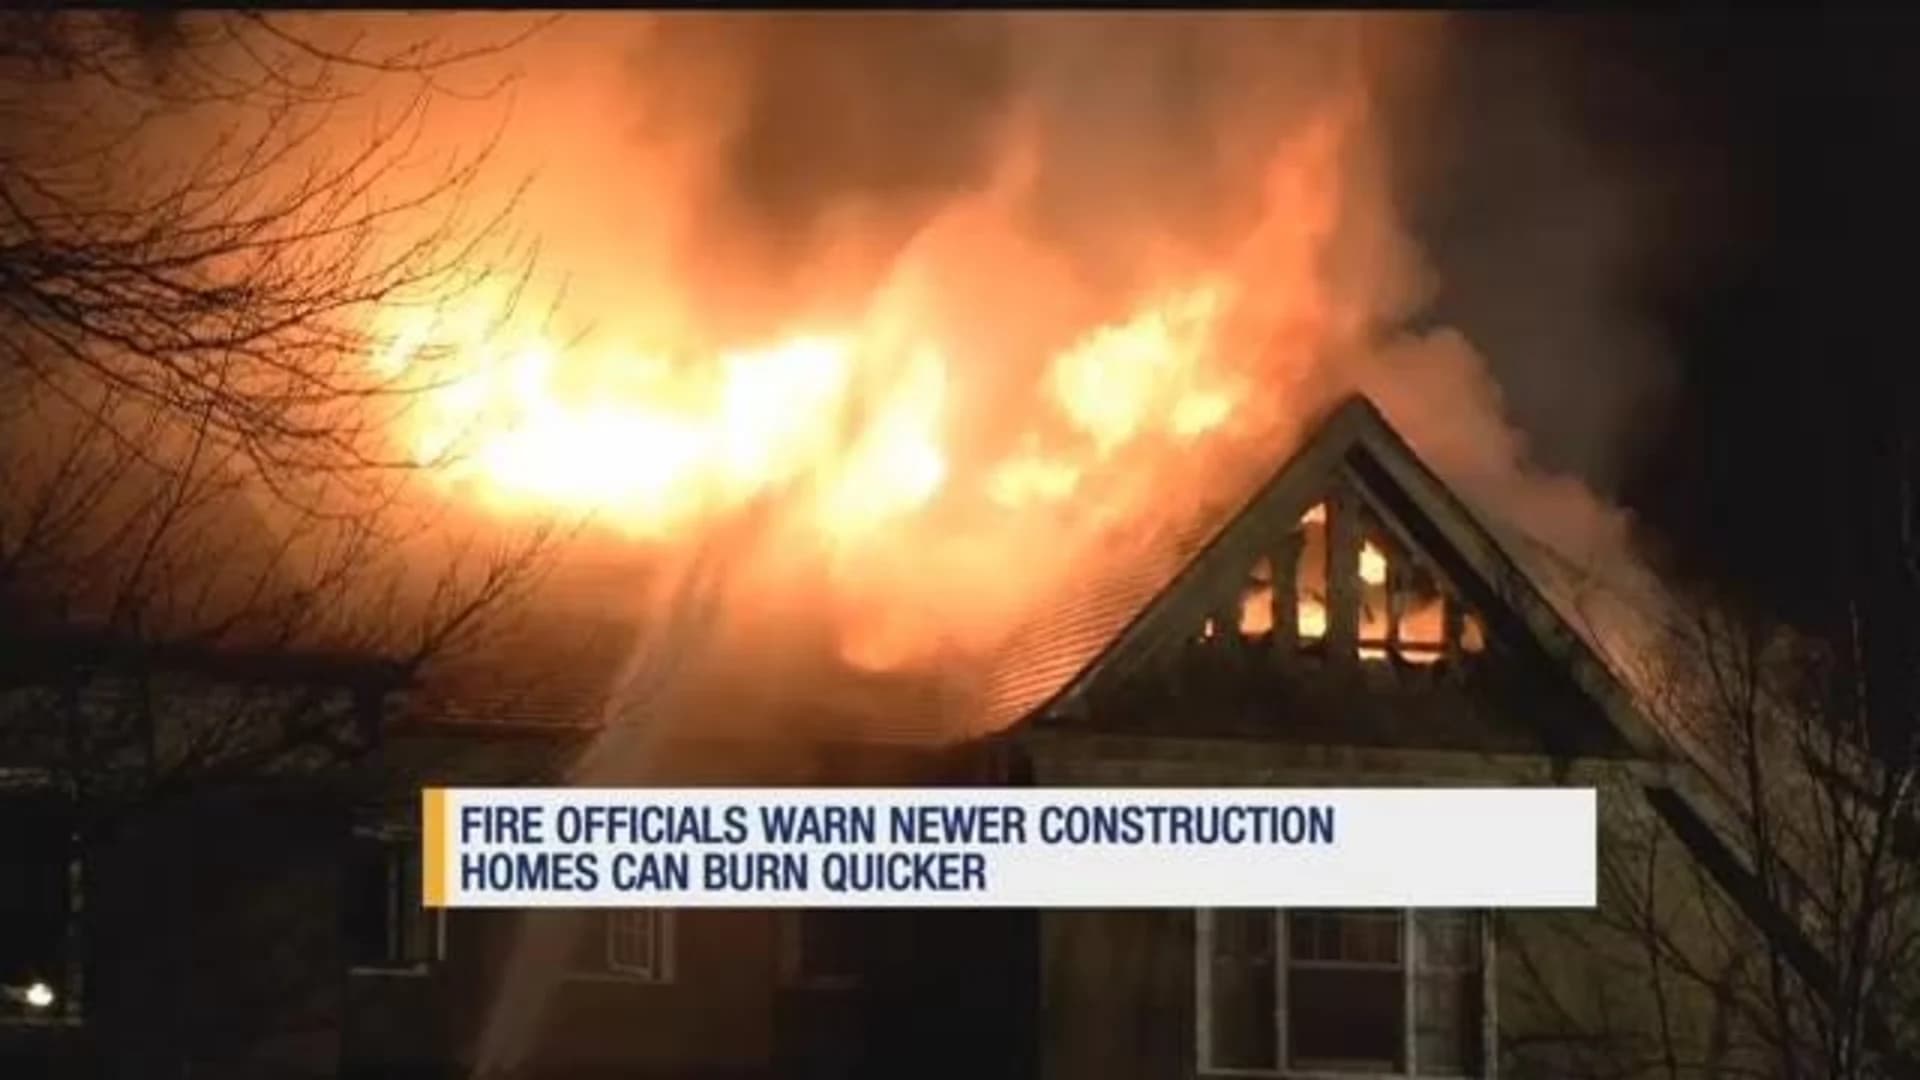 Heads up for homeowners: Houses with newer construction may burn quicker